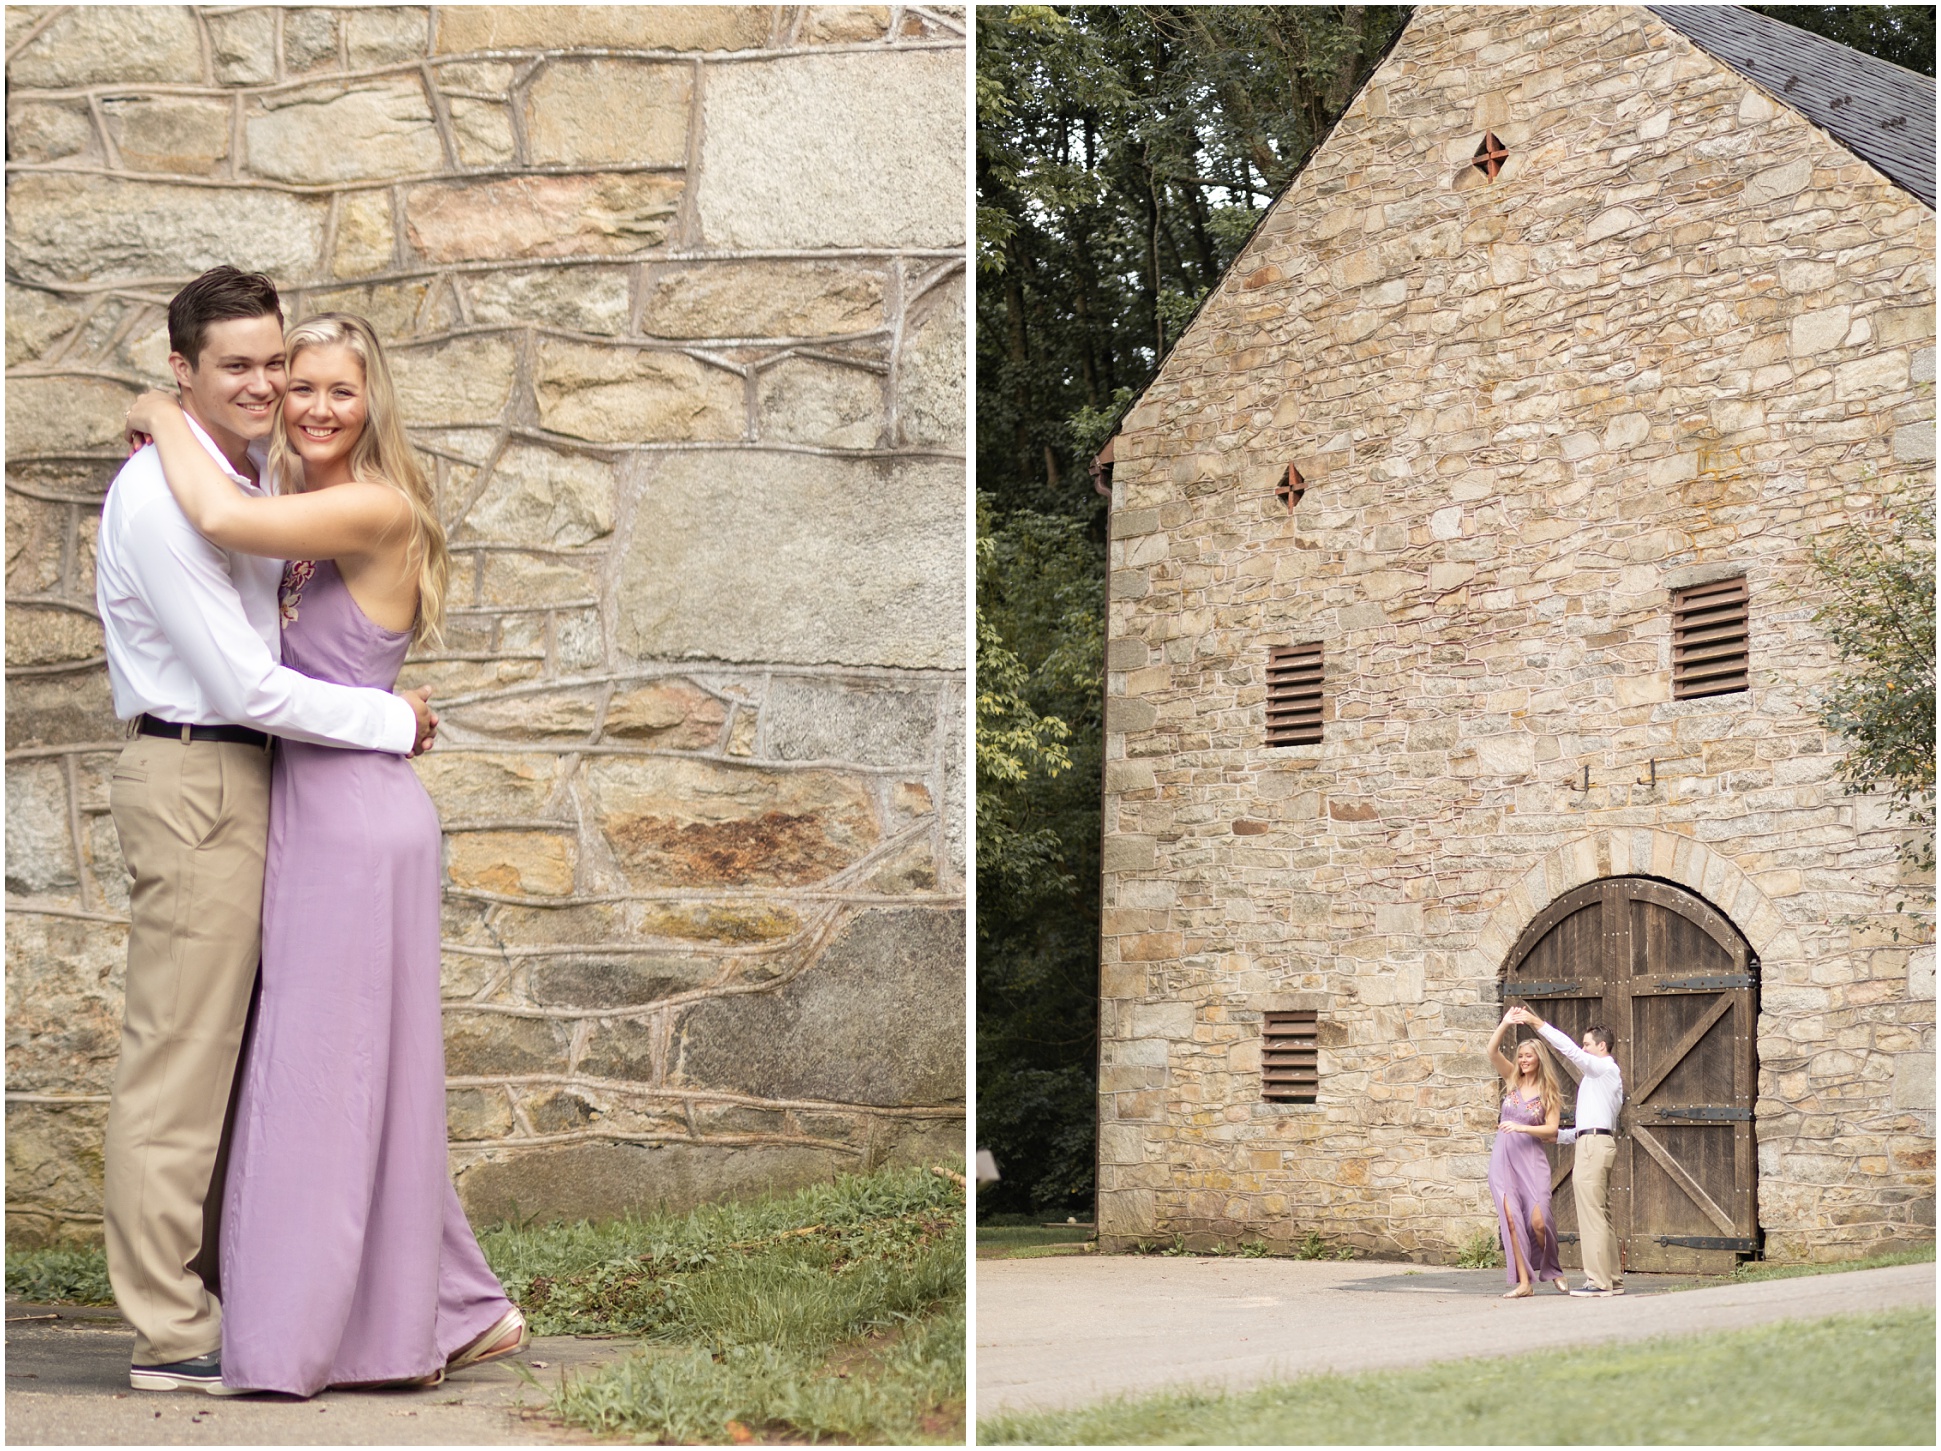 Two images of Katie and Rob during their engagement session at Susquehanna State Park